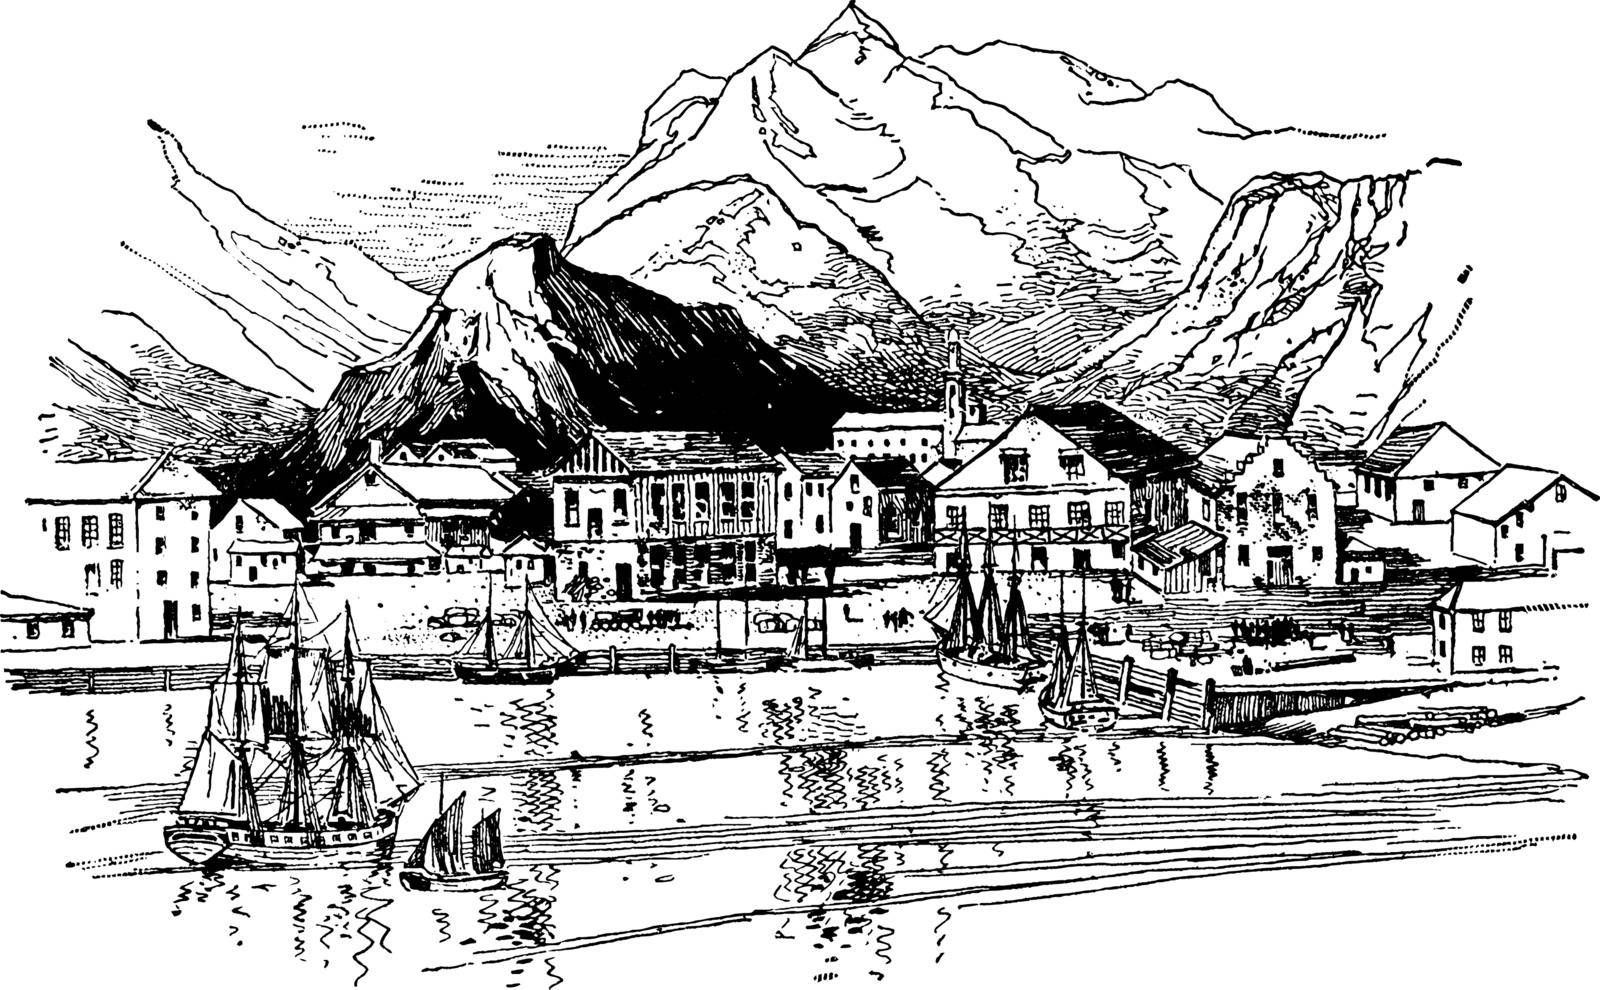 This image represents From the Harbor a Bit of Honolulu, vintage line drawing or engraving illustration.